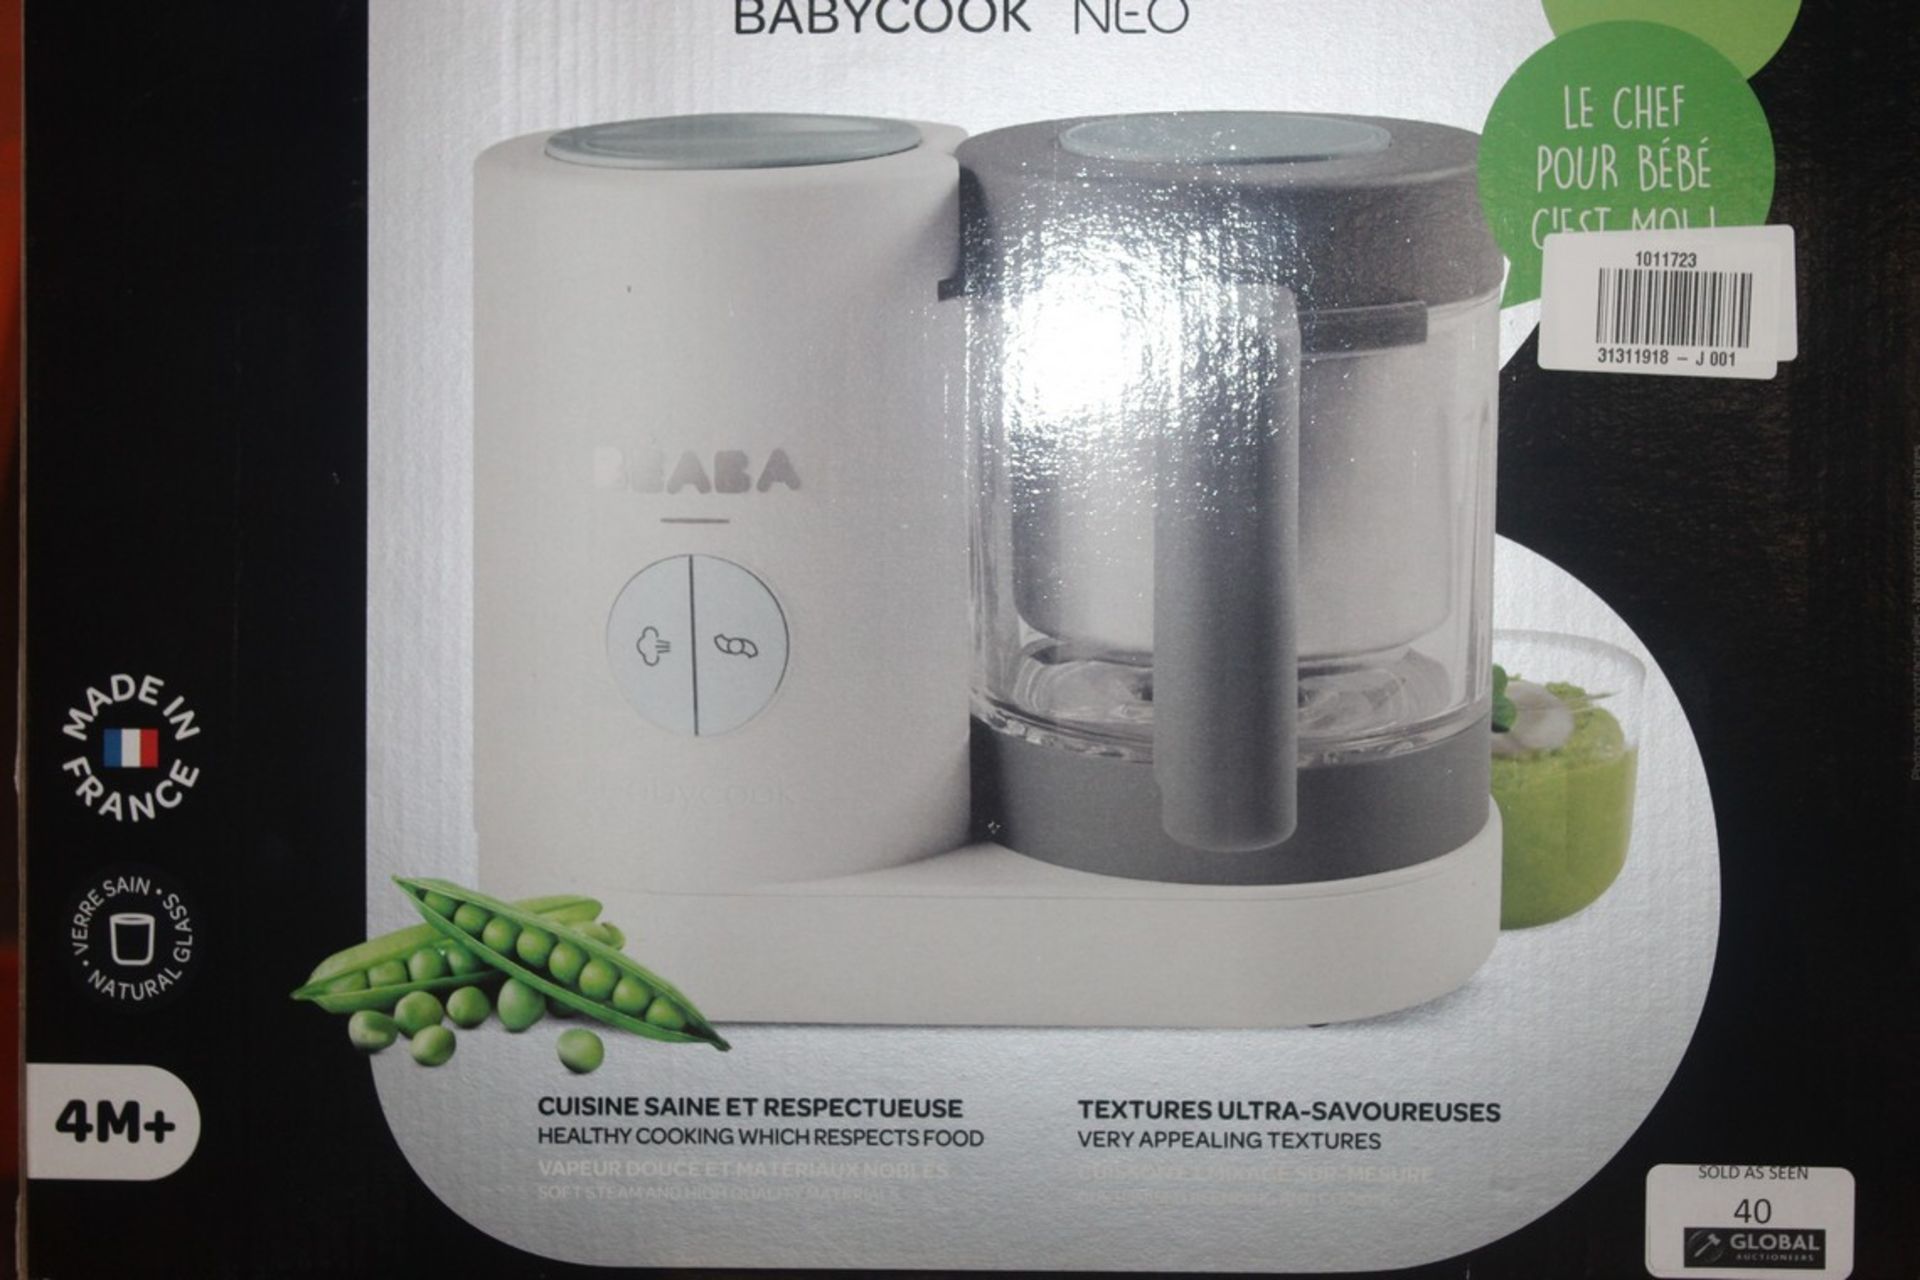 Boxed Beaba Baby Cook Neo Food Cooker RRP £160 (1011723) (Appraisals Available On Request) (Pictures